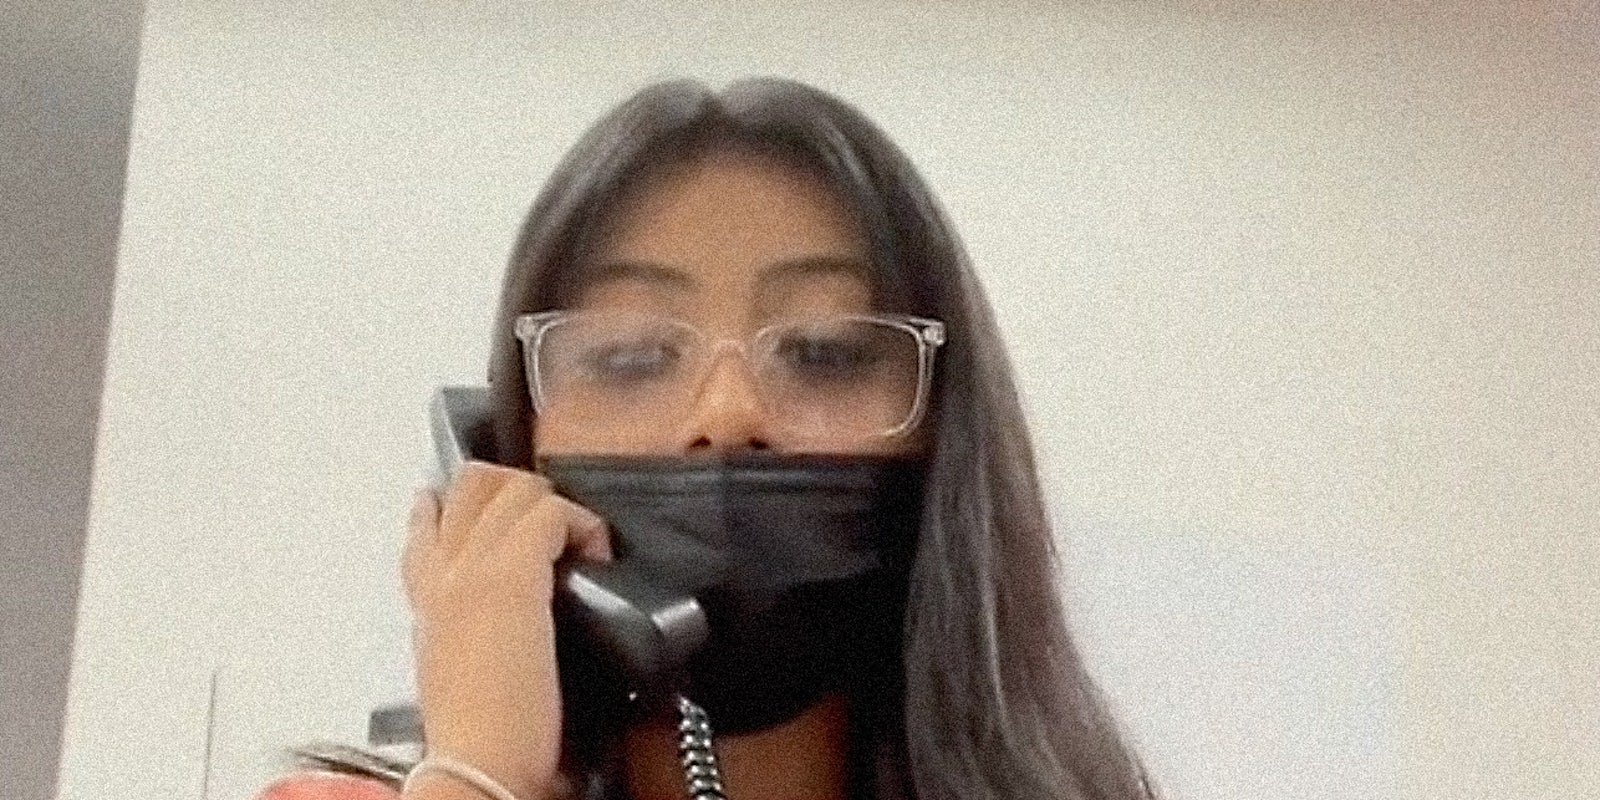 A woman on a telephone.